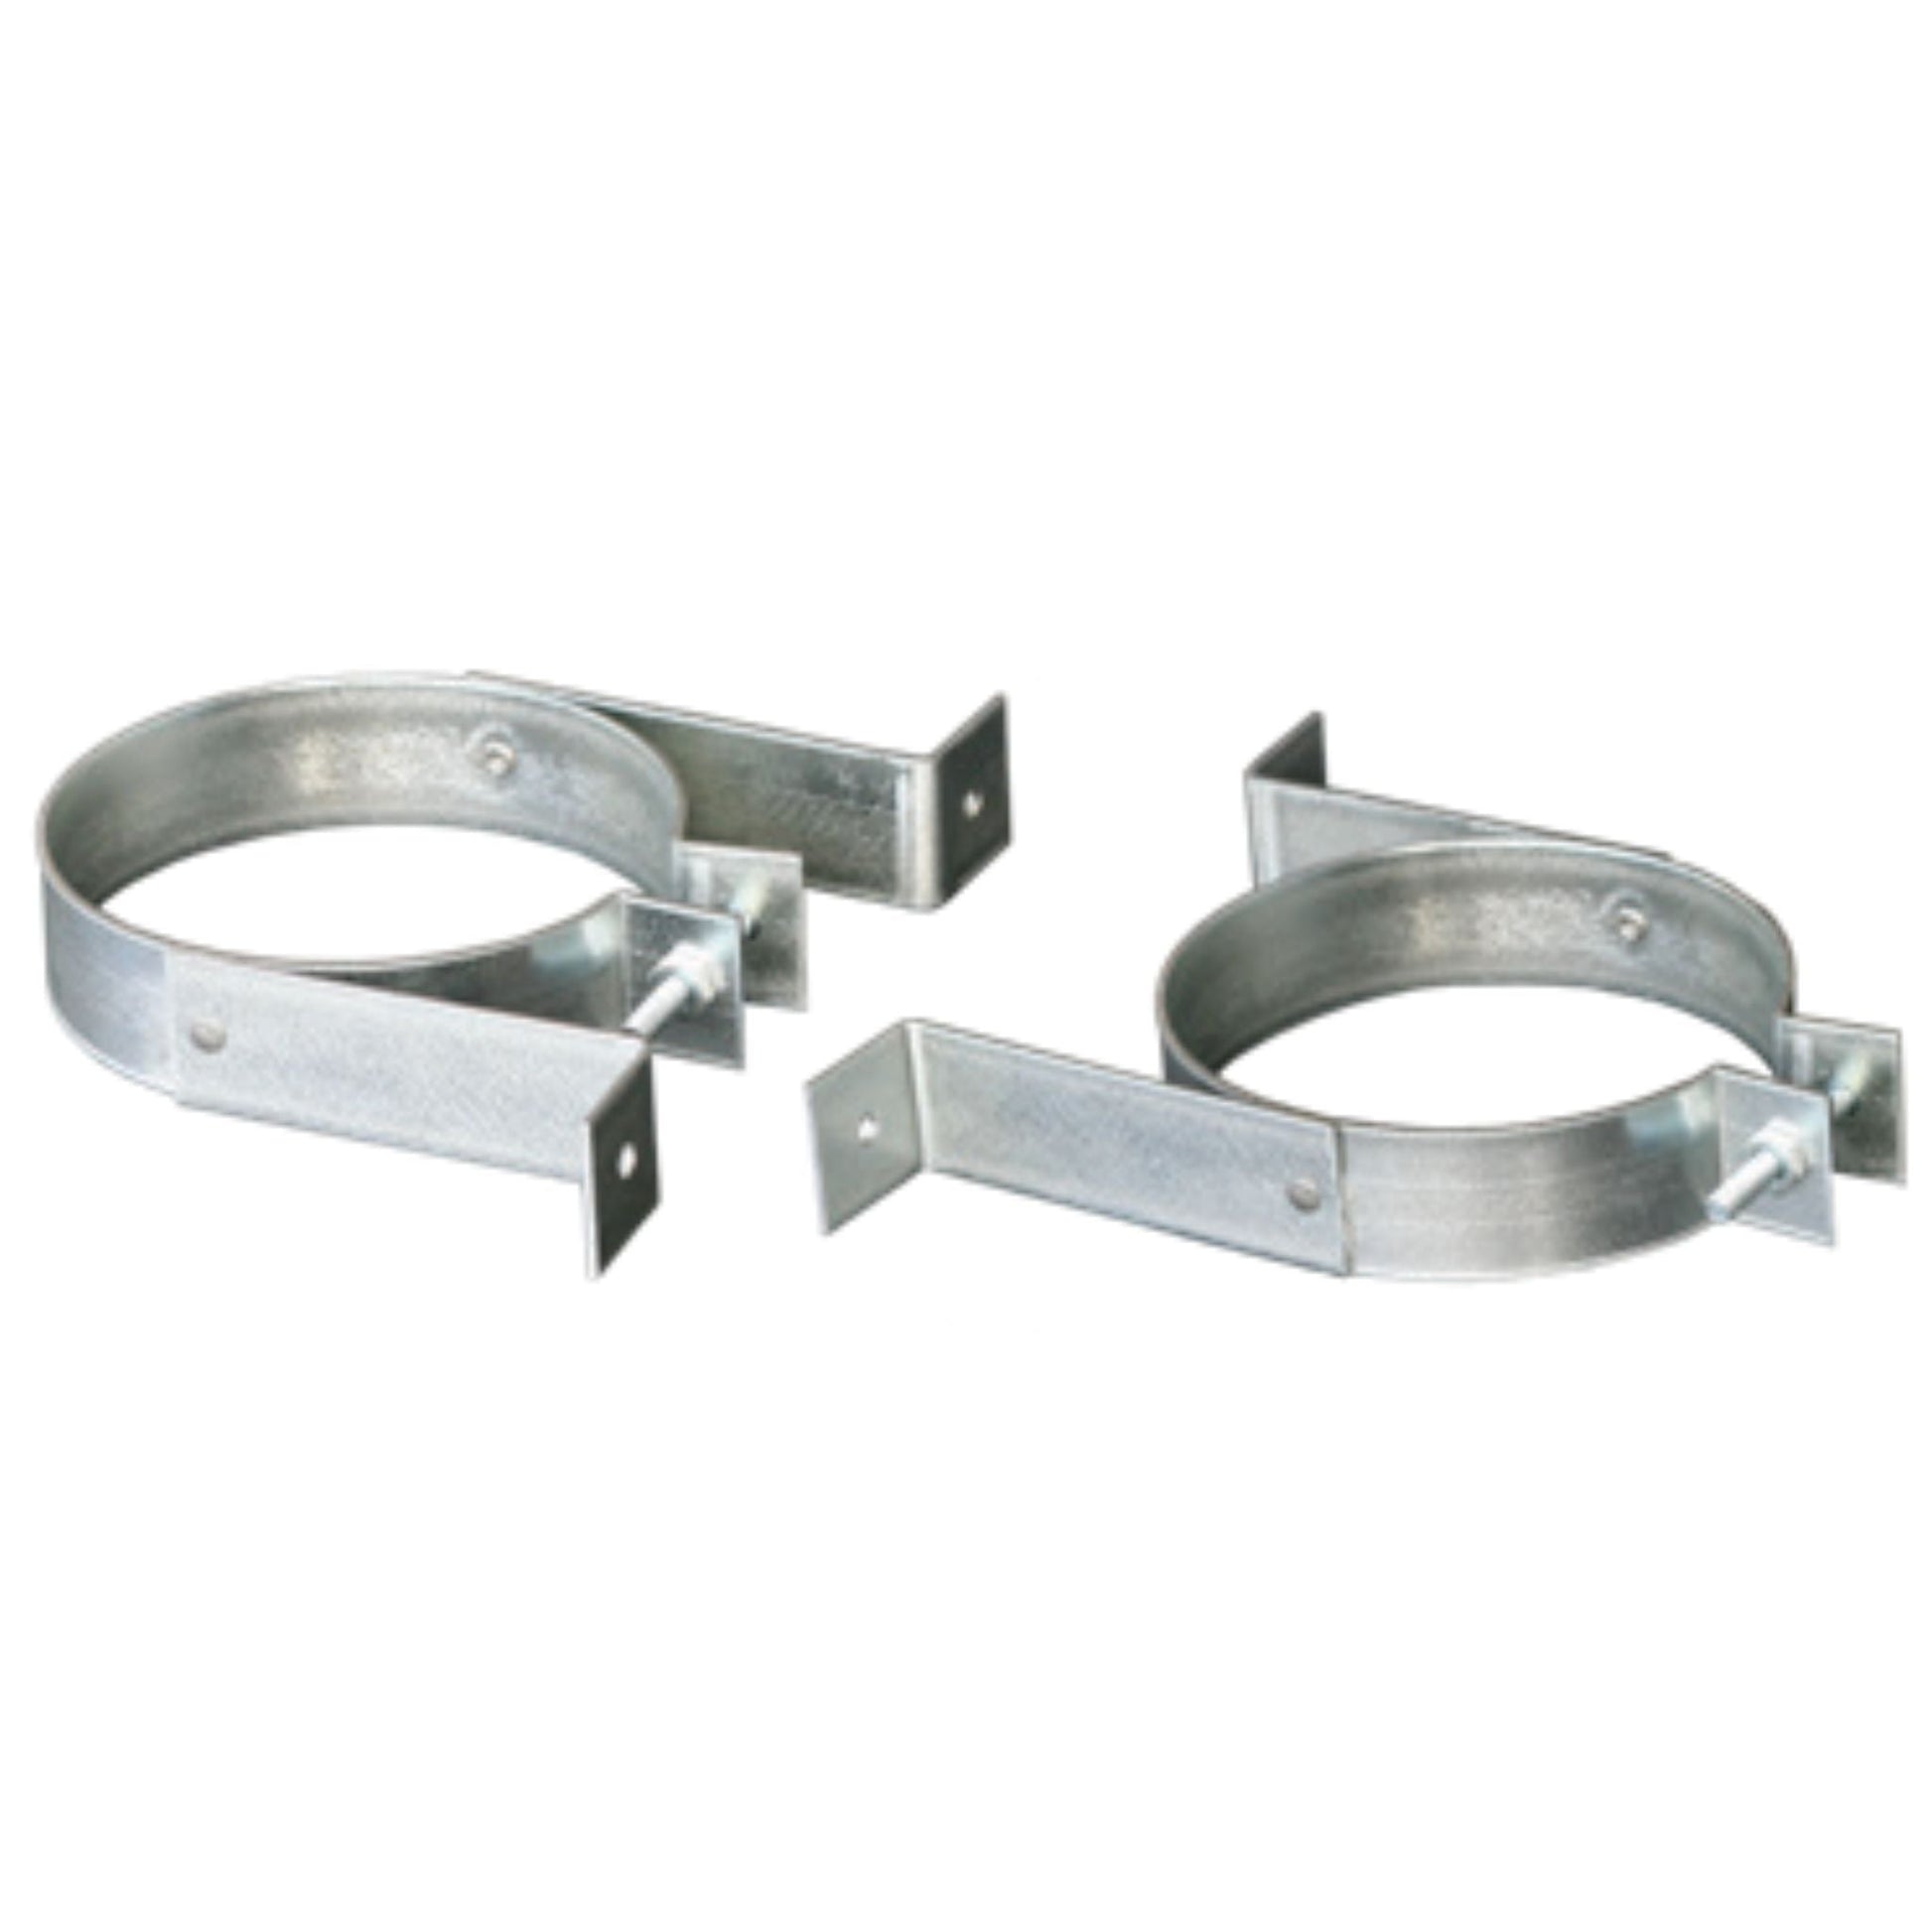 DuraVent Concentric Vent System 3" x 5" Wall Strap